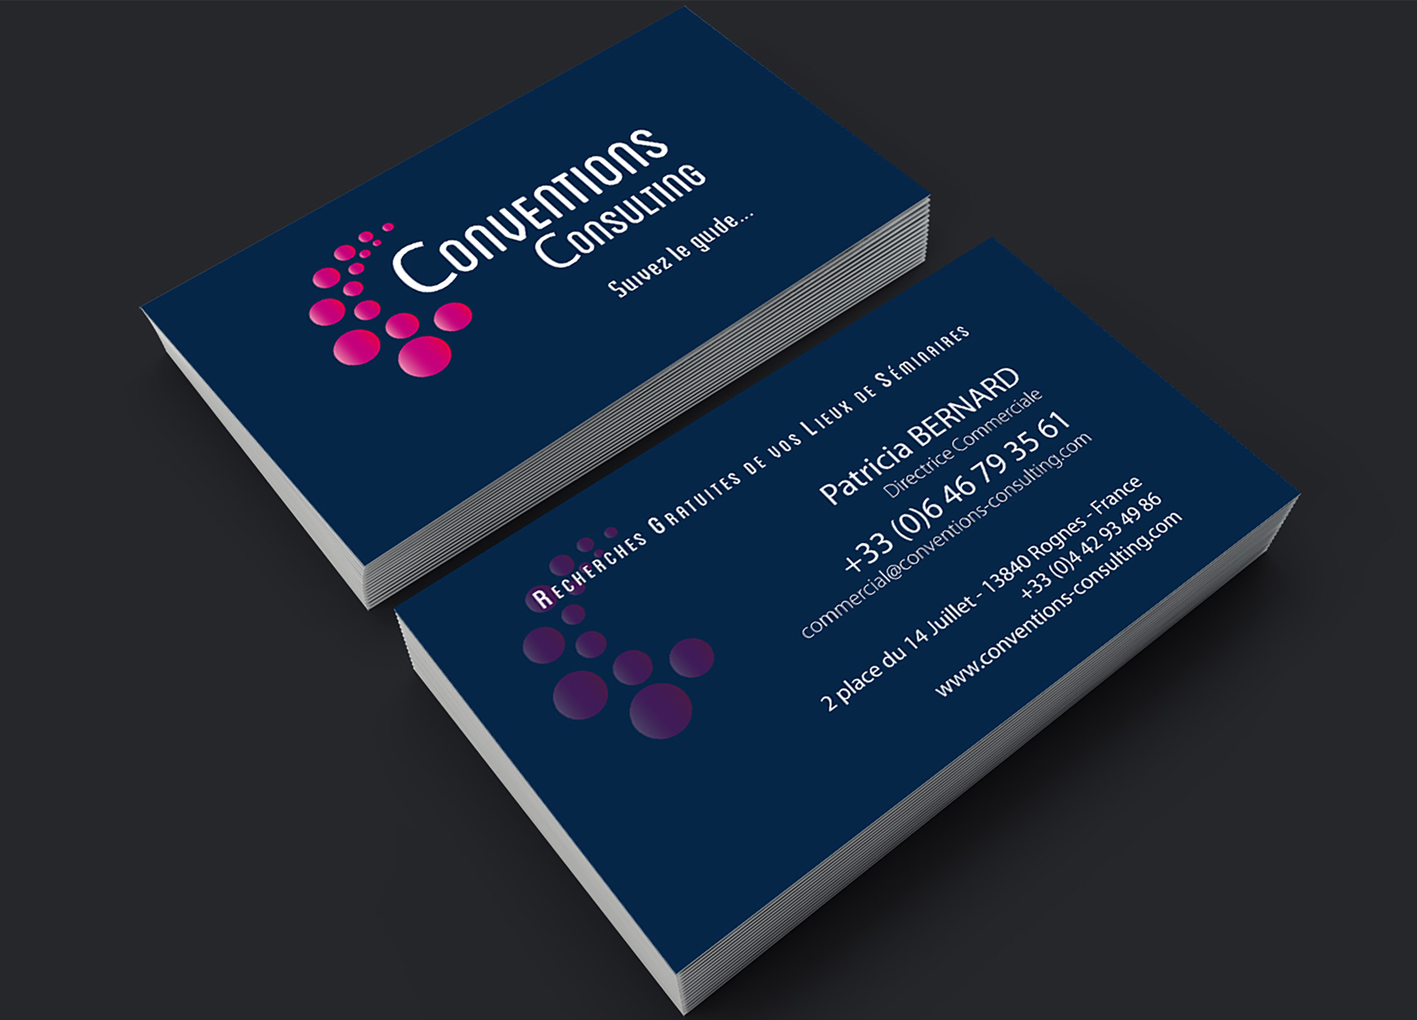 CONVENTION CONSULTING Business Card Mockup 2020 - Conventions consulting